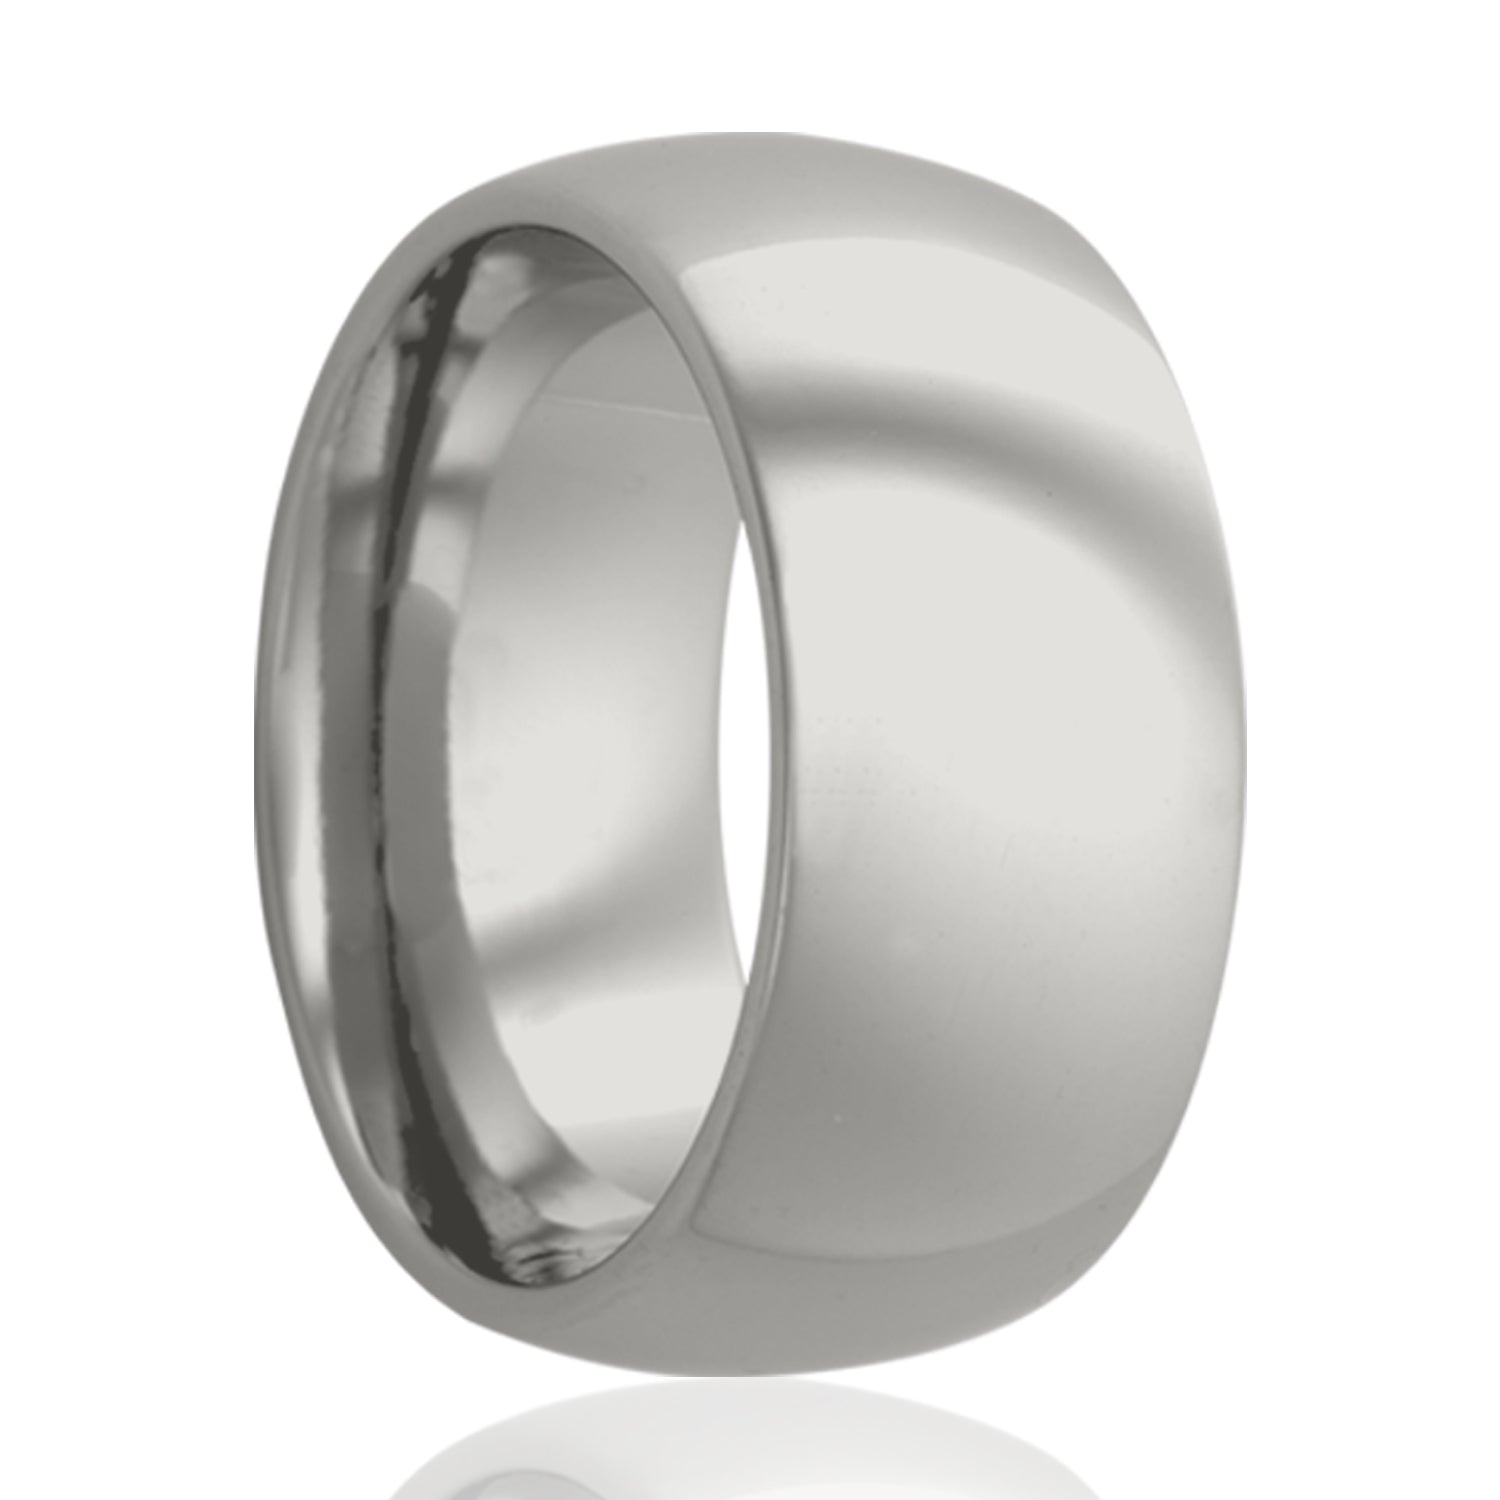 A classic polished domed cobalt wedding band displayed on a neutral white background.